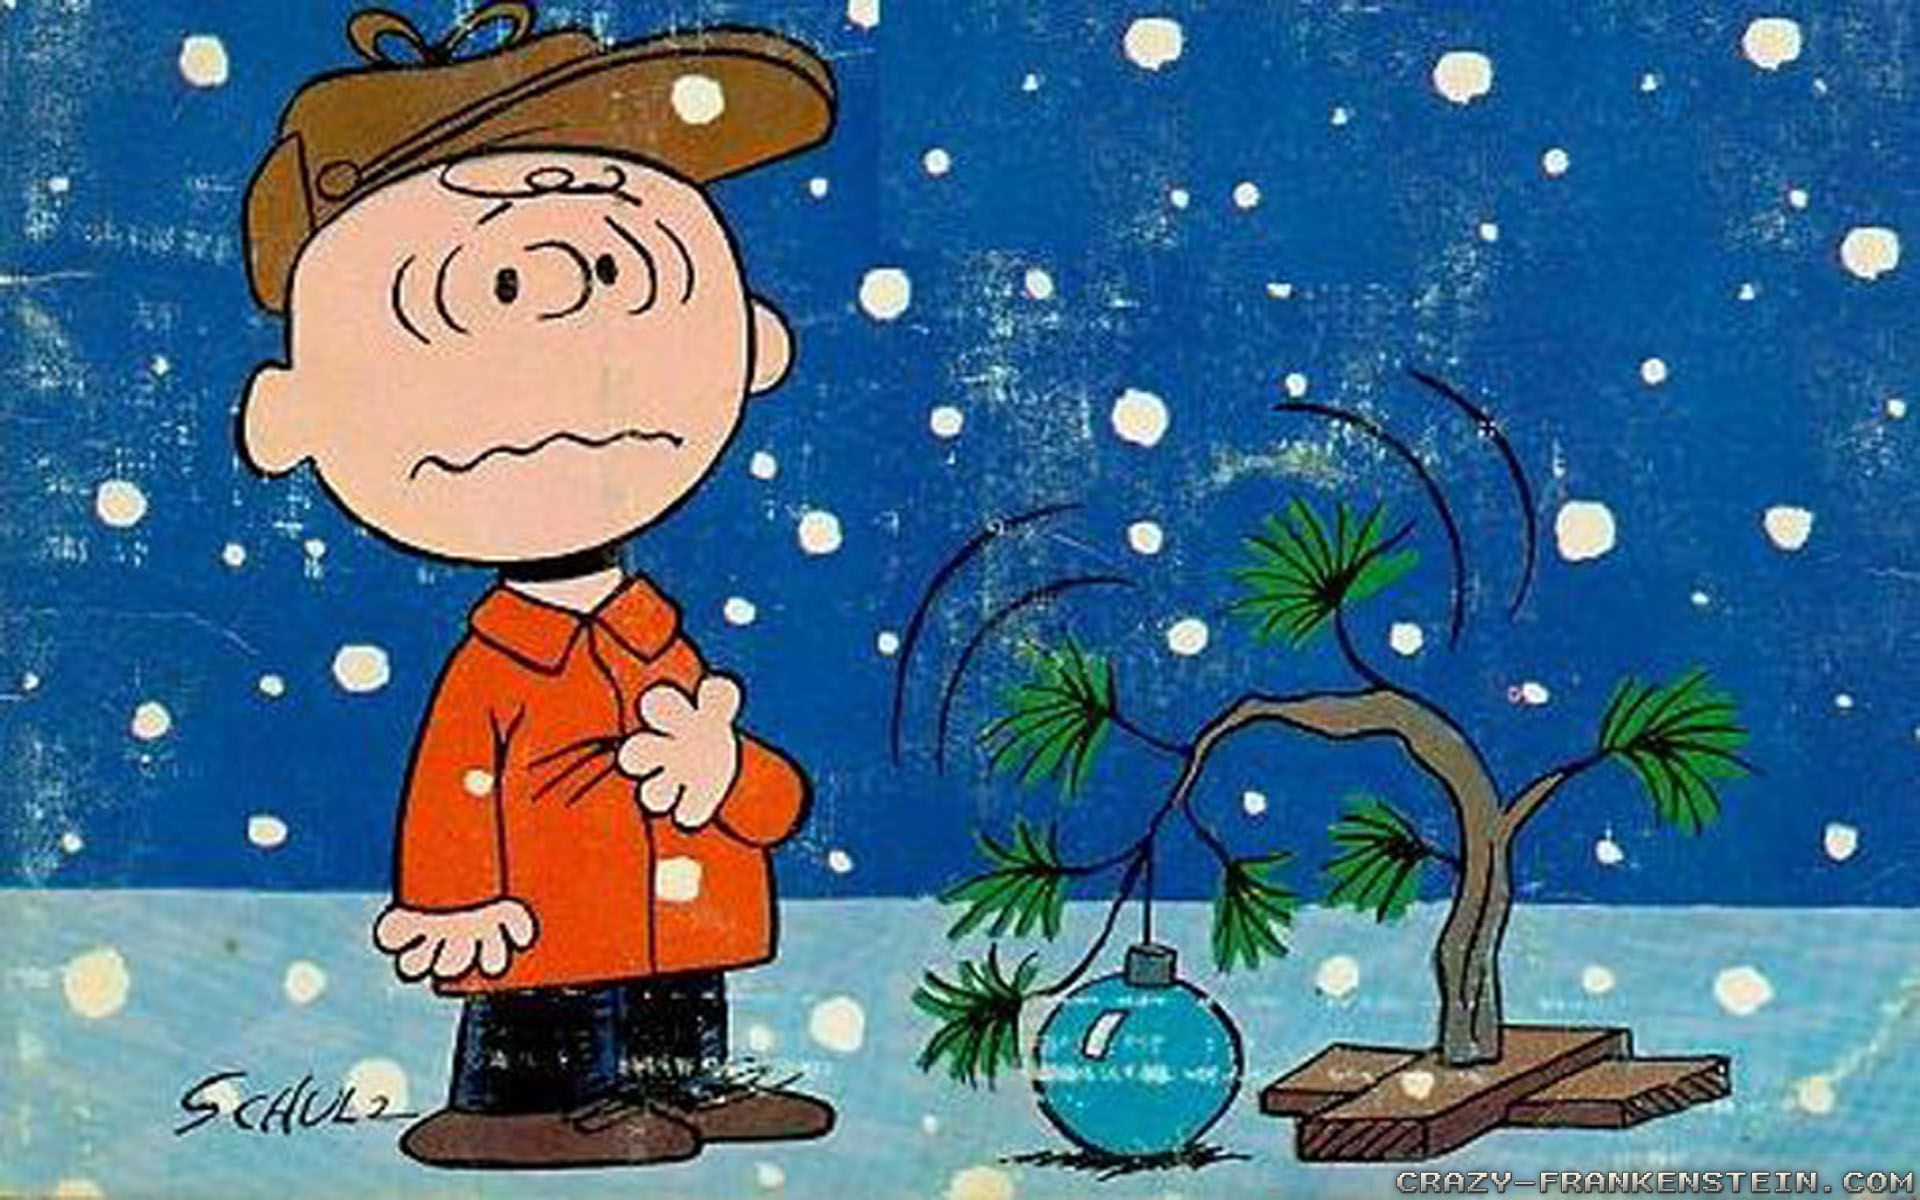 5 Charlie Brown HD Wallpapers | Backgrounds - Wallpaper Abyss